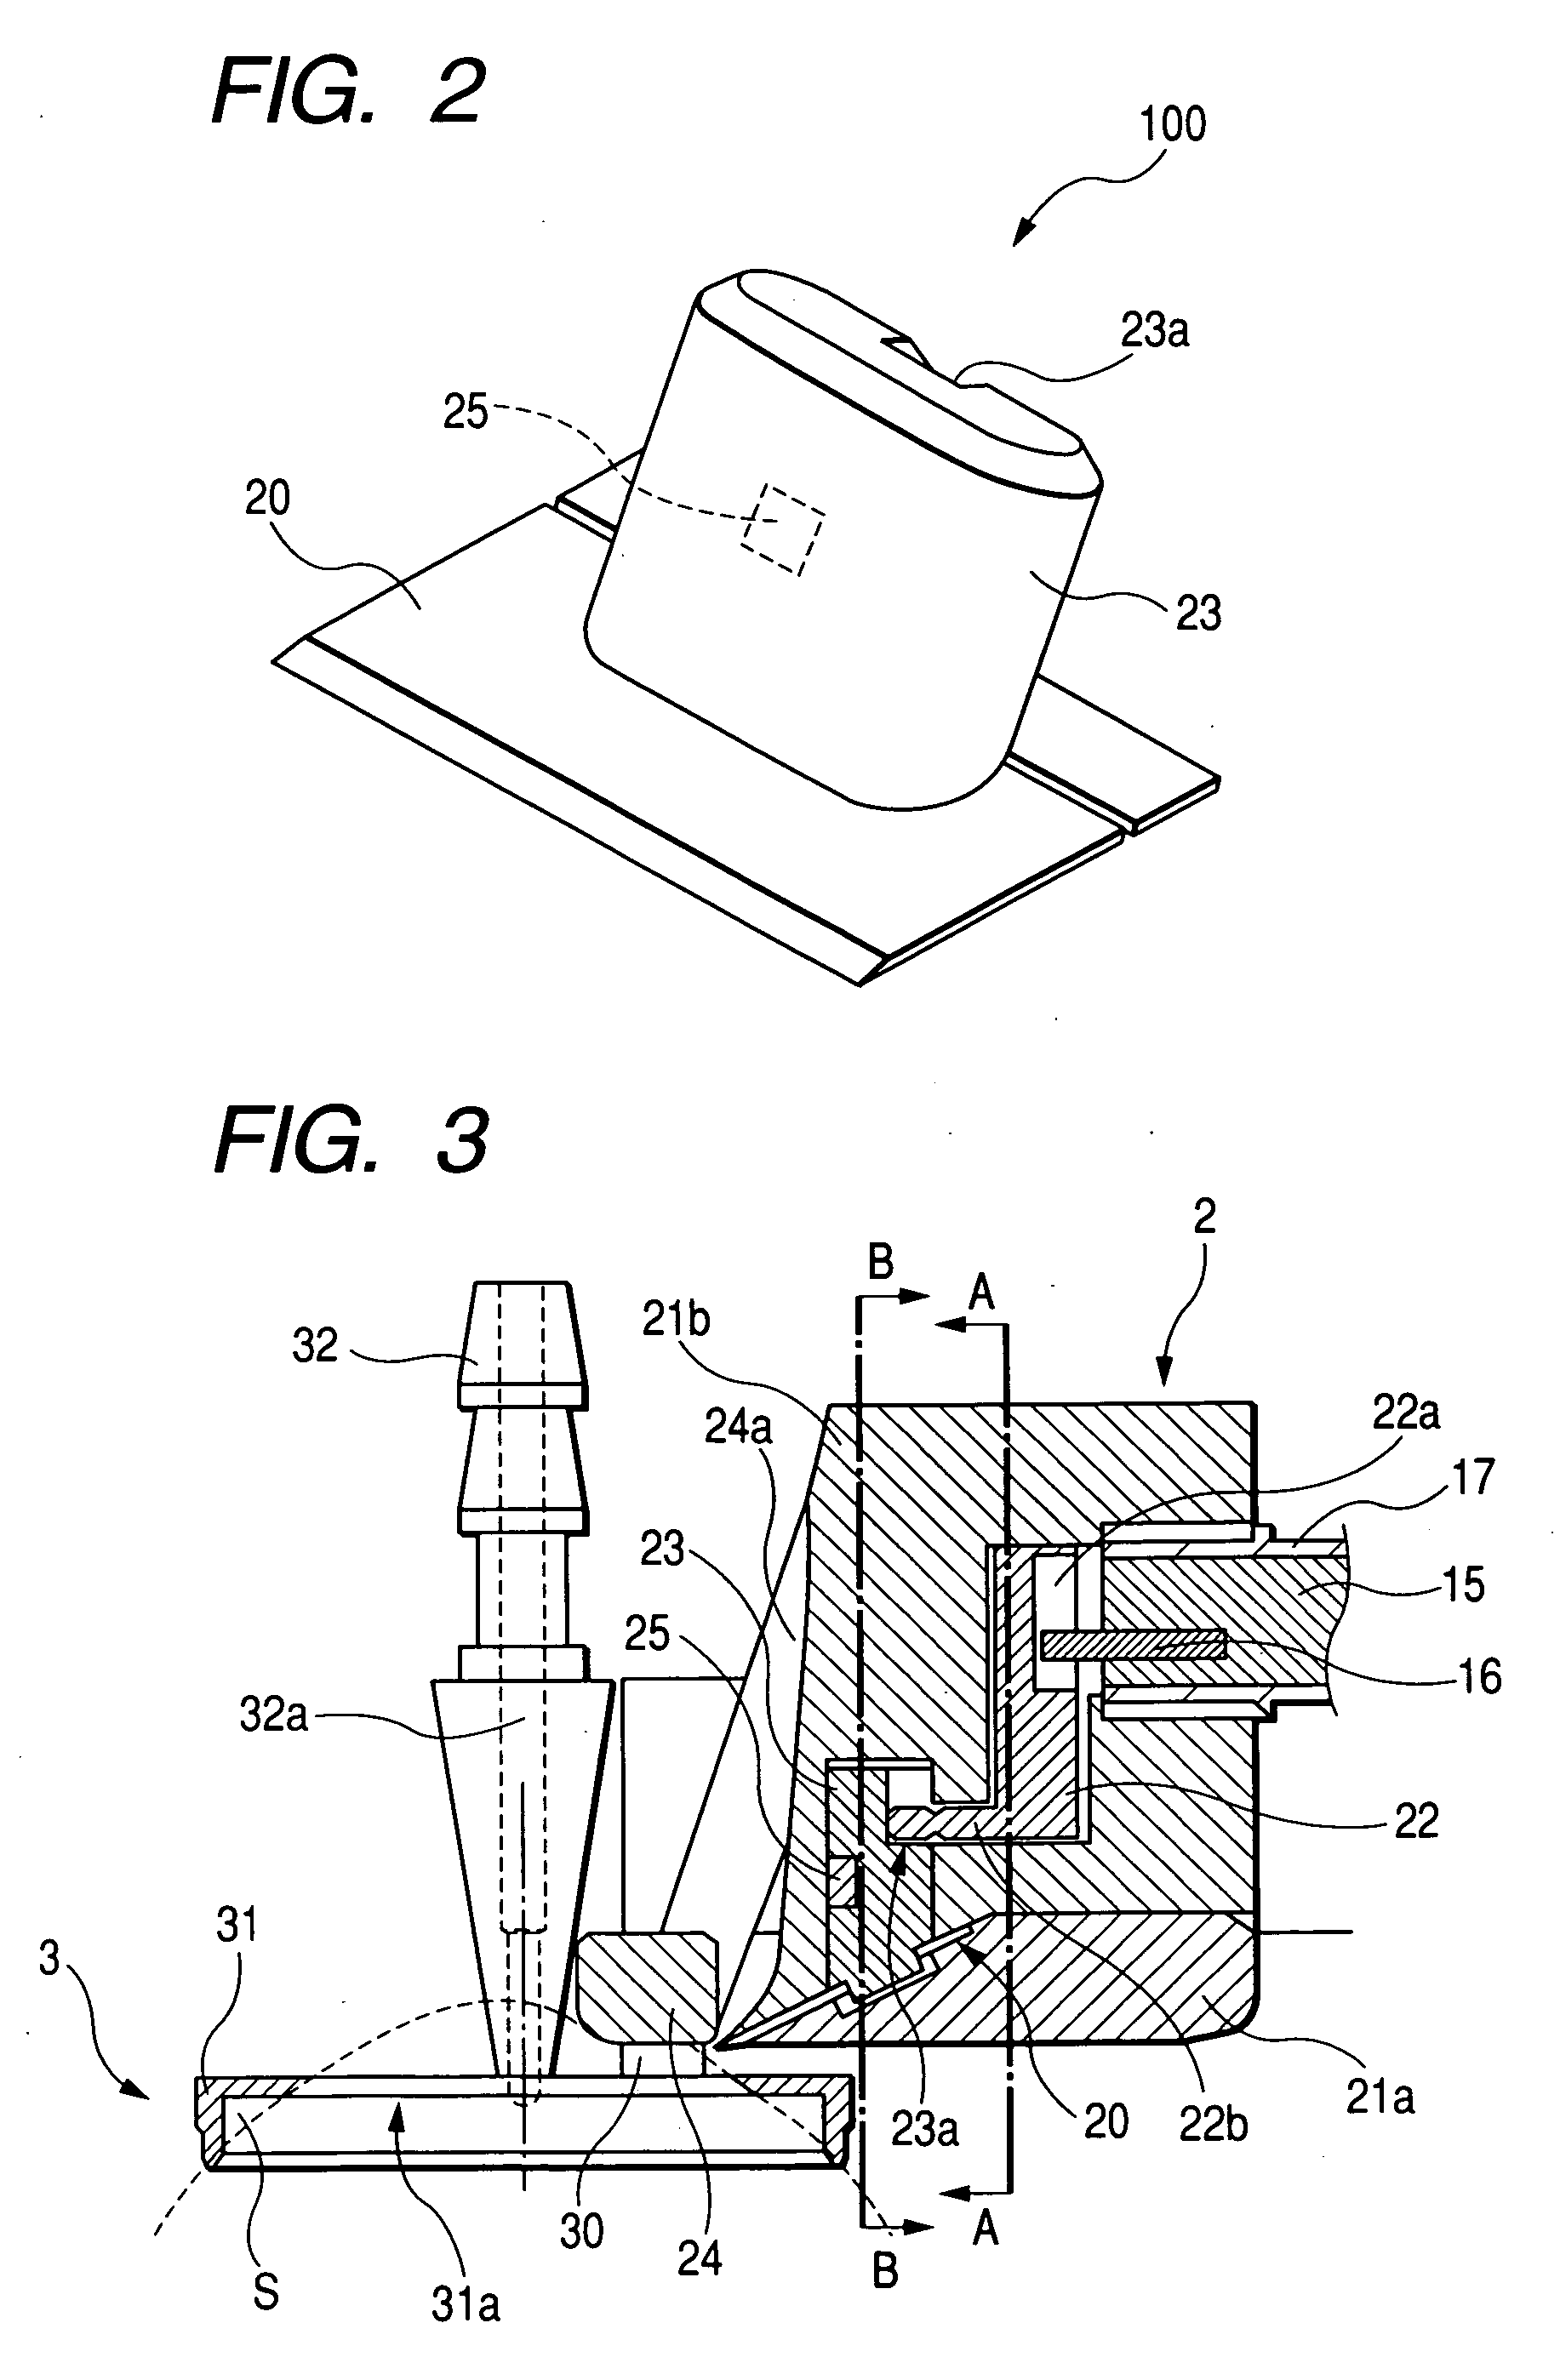 Corneal surgical apparatus and blade unit attached to corneal surgical apparatus for use in corneal surgery